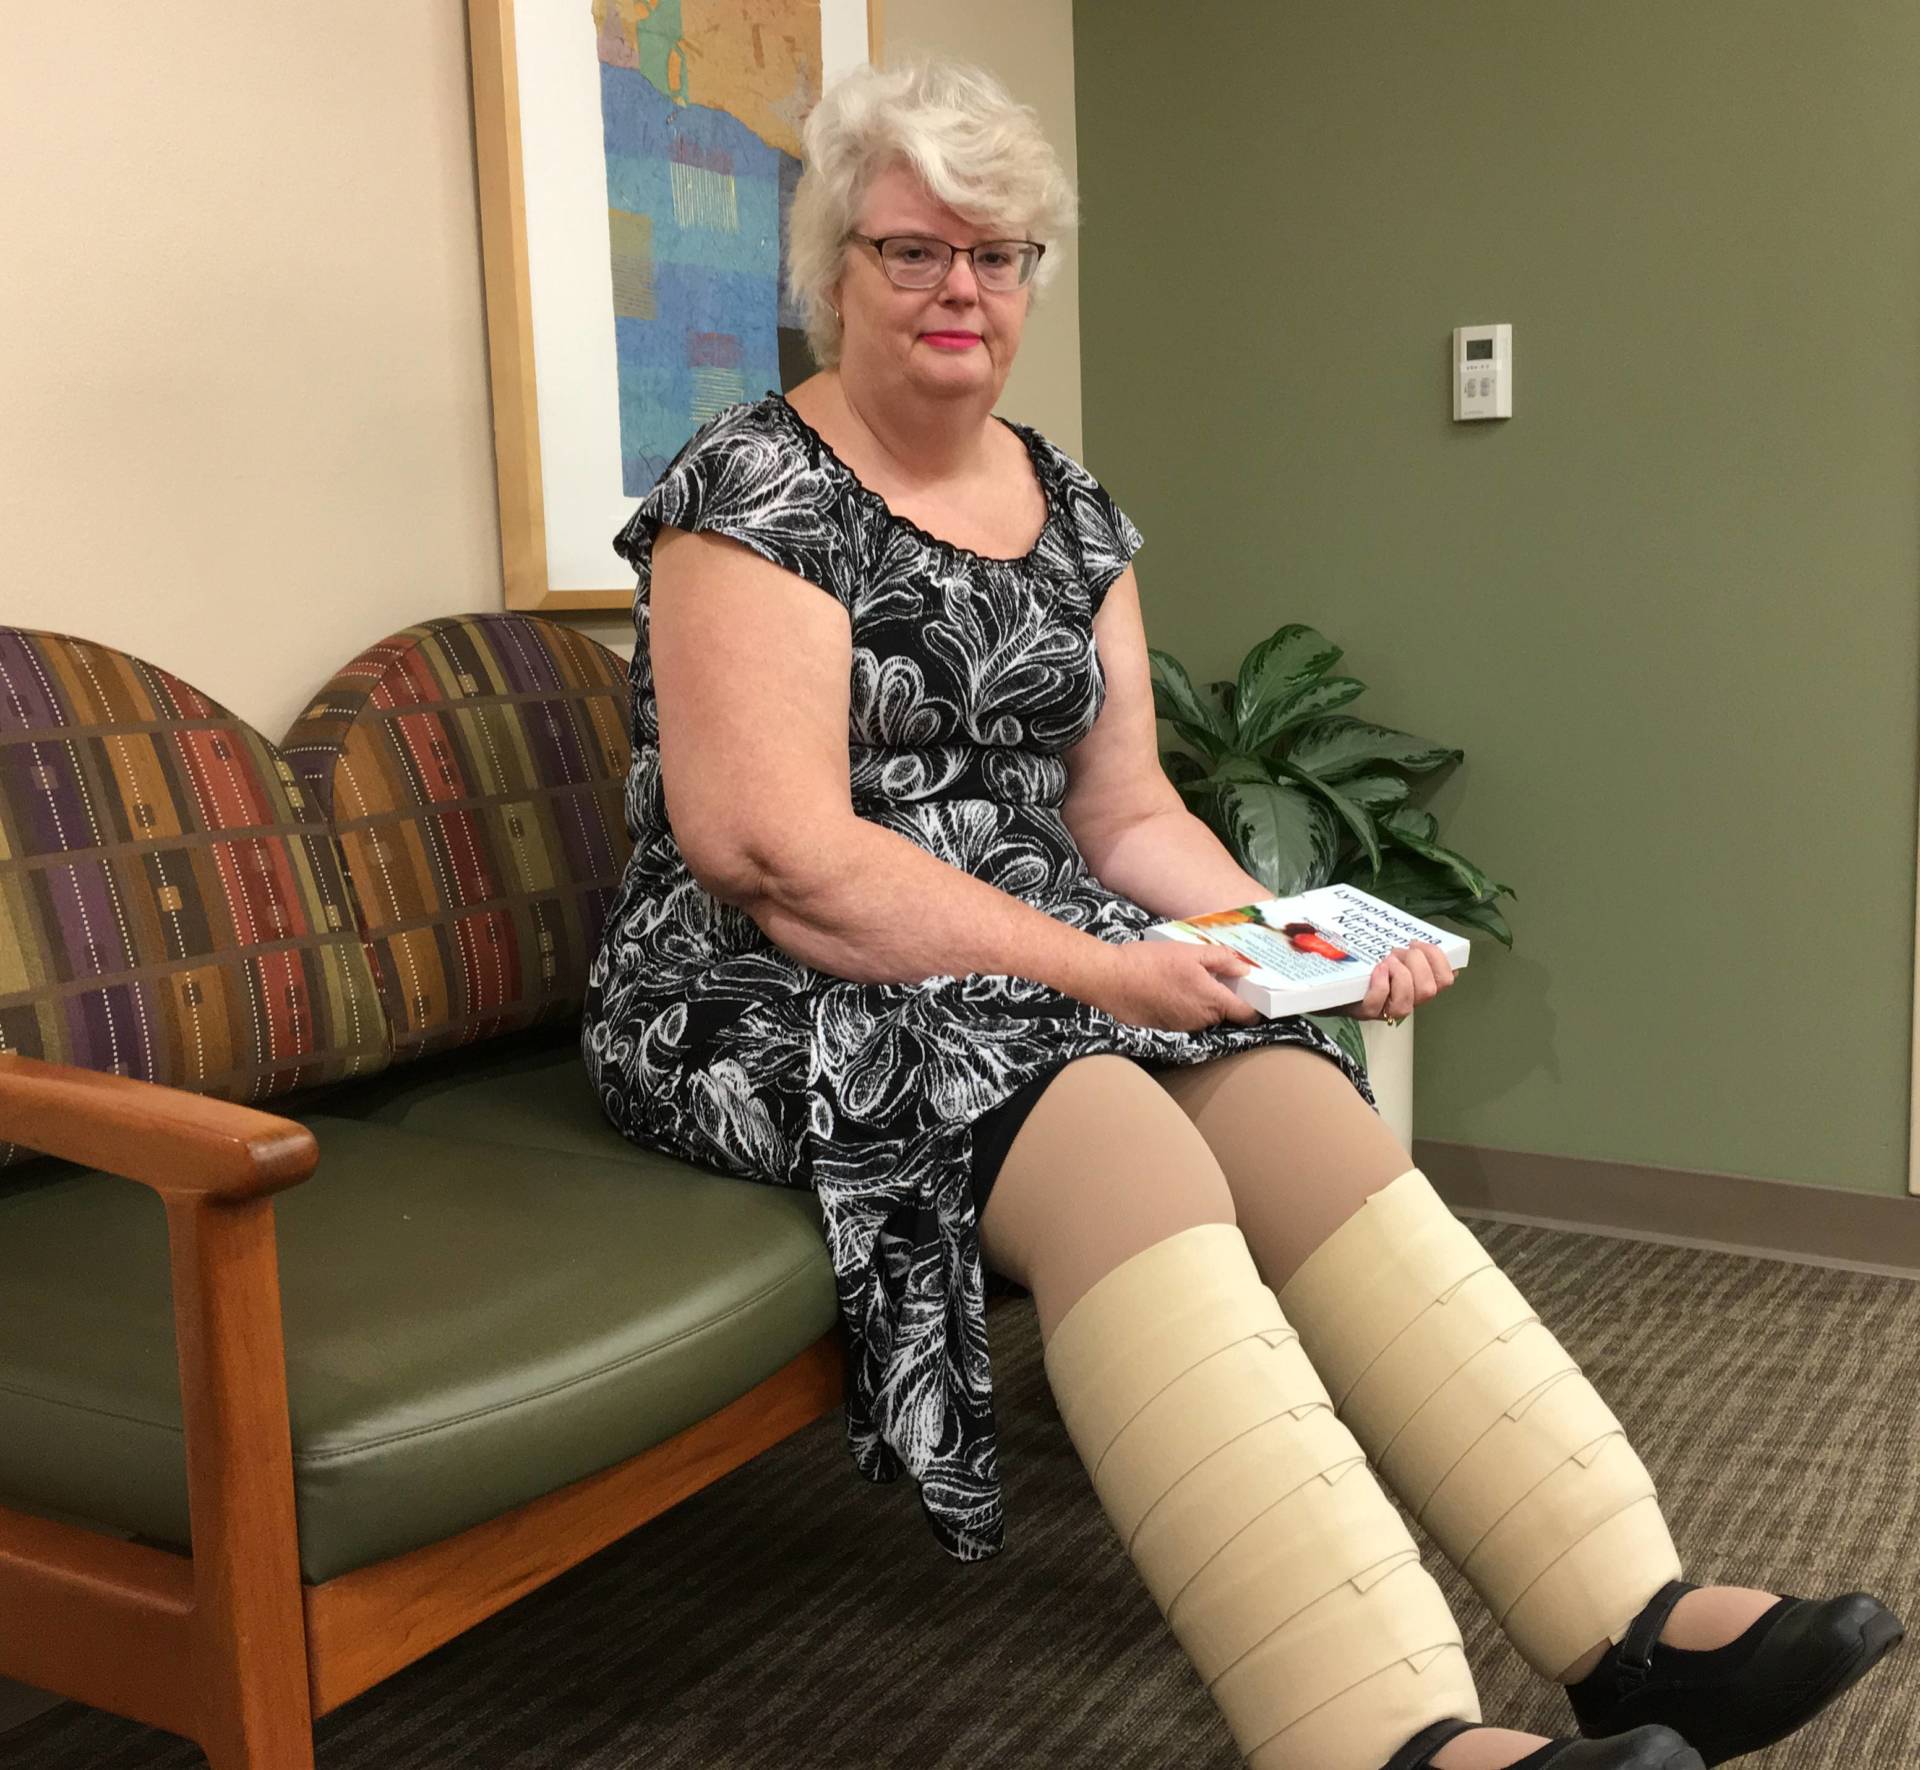 Lipedema: The Fat Disorder That Millions Have But No One Has Heard Of